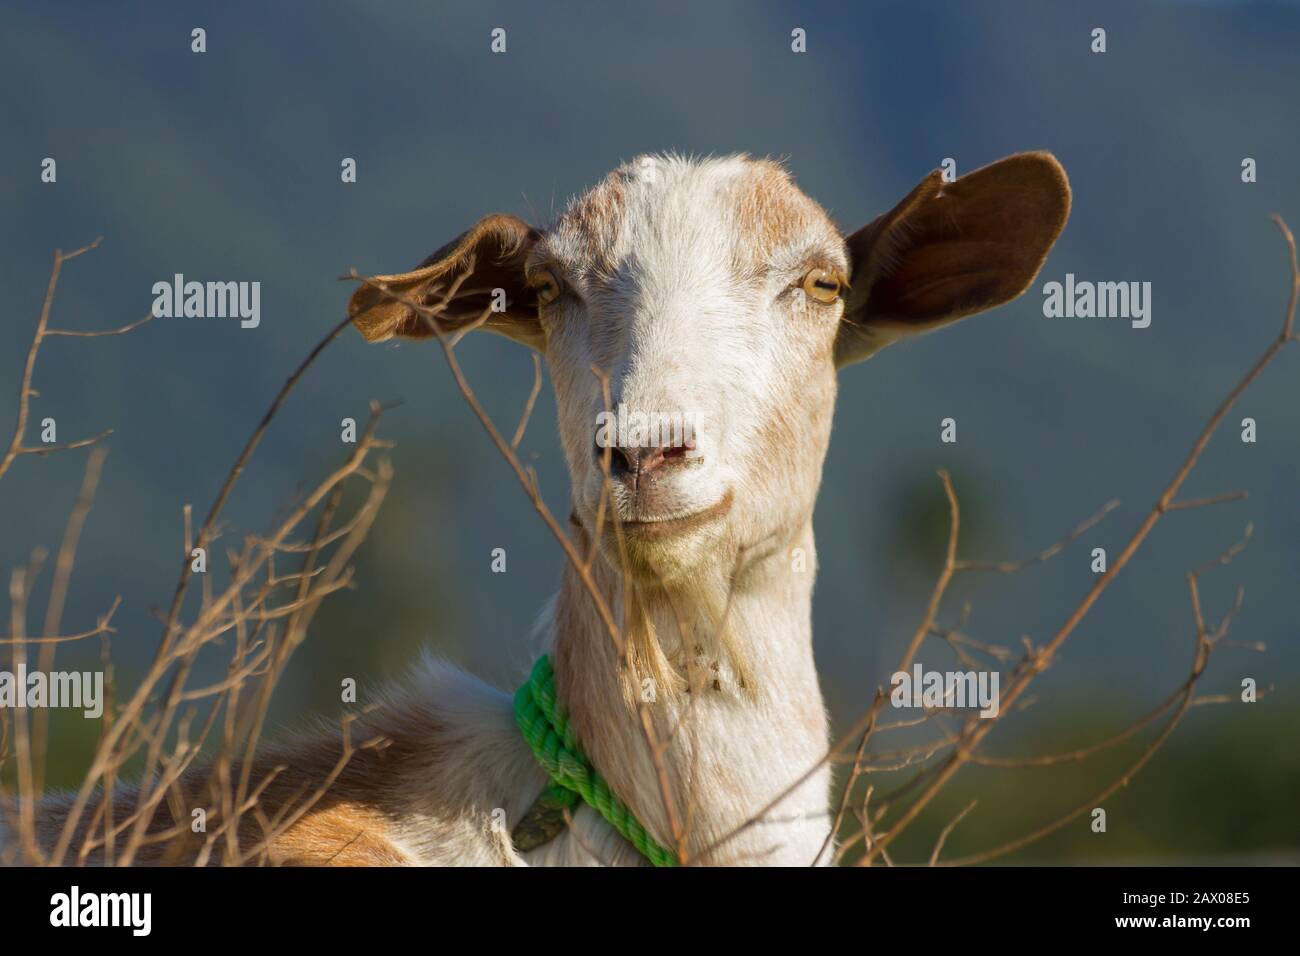 Goat Head Man Images – Browse 2,232 Stock Photos, Vectors, and Video